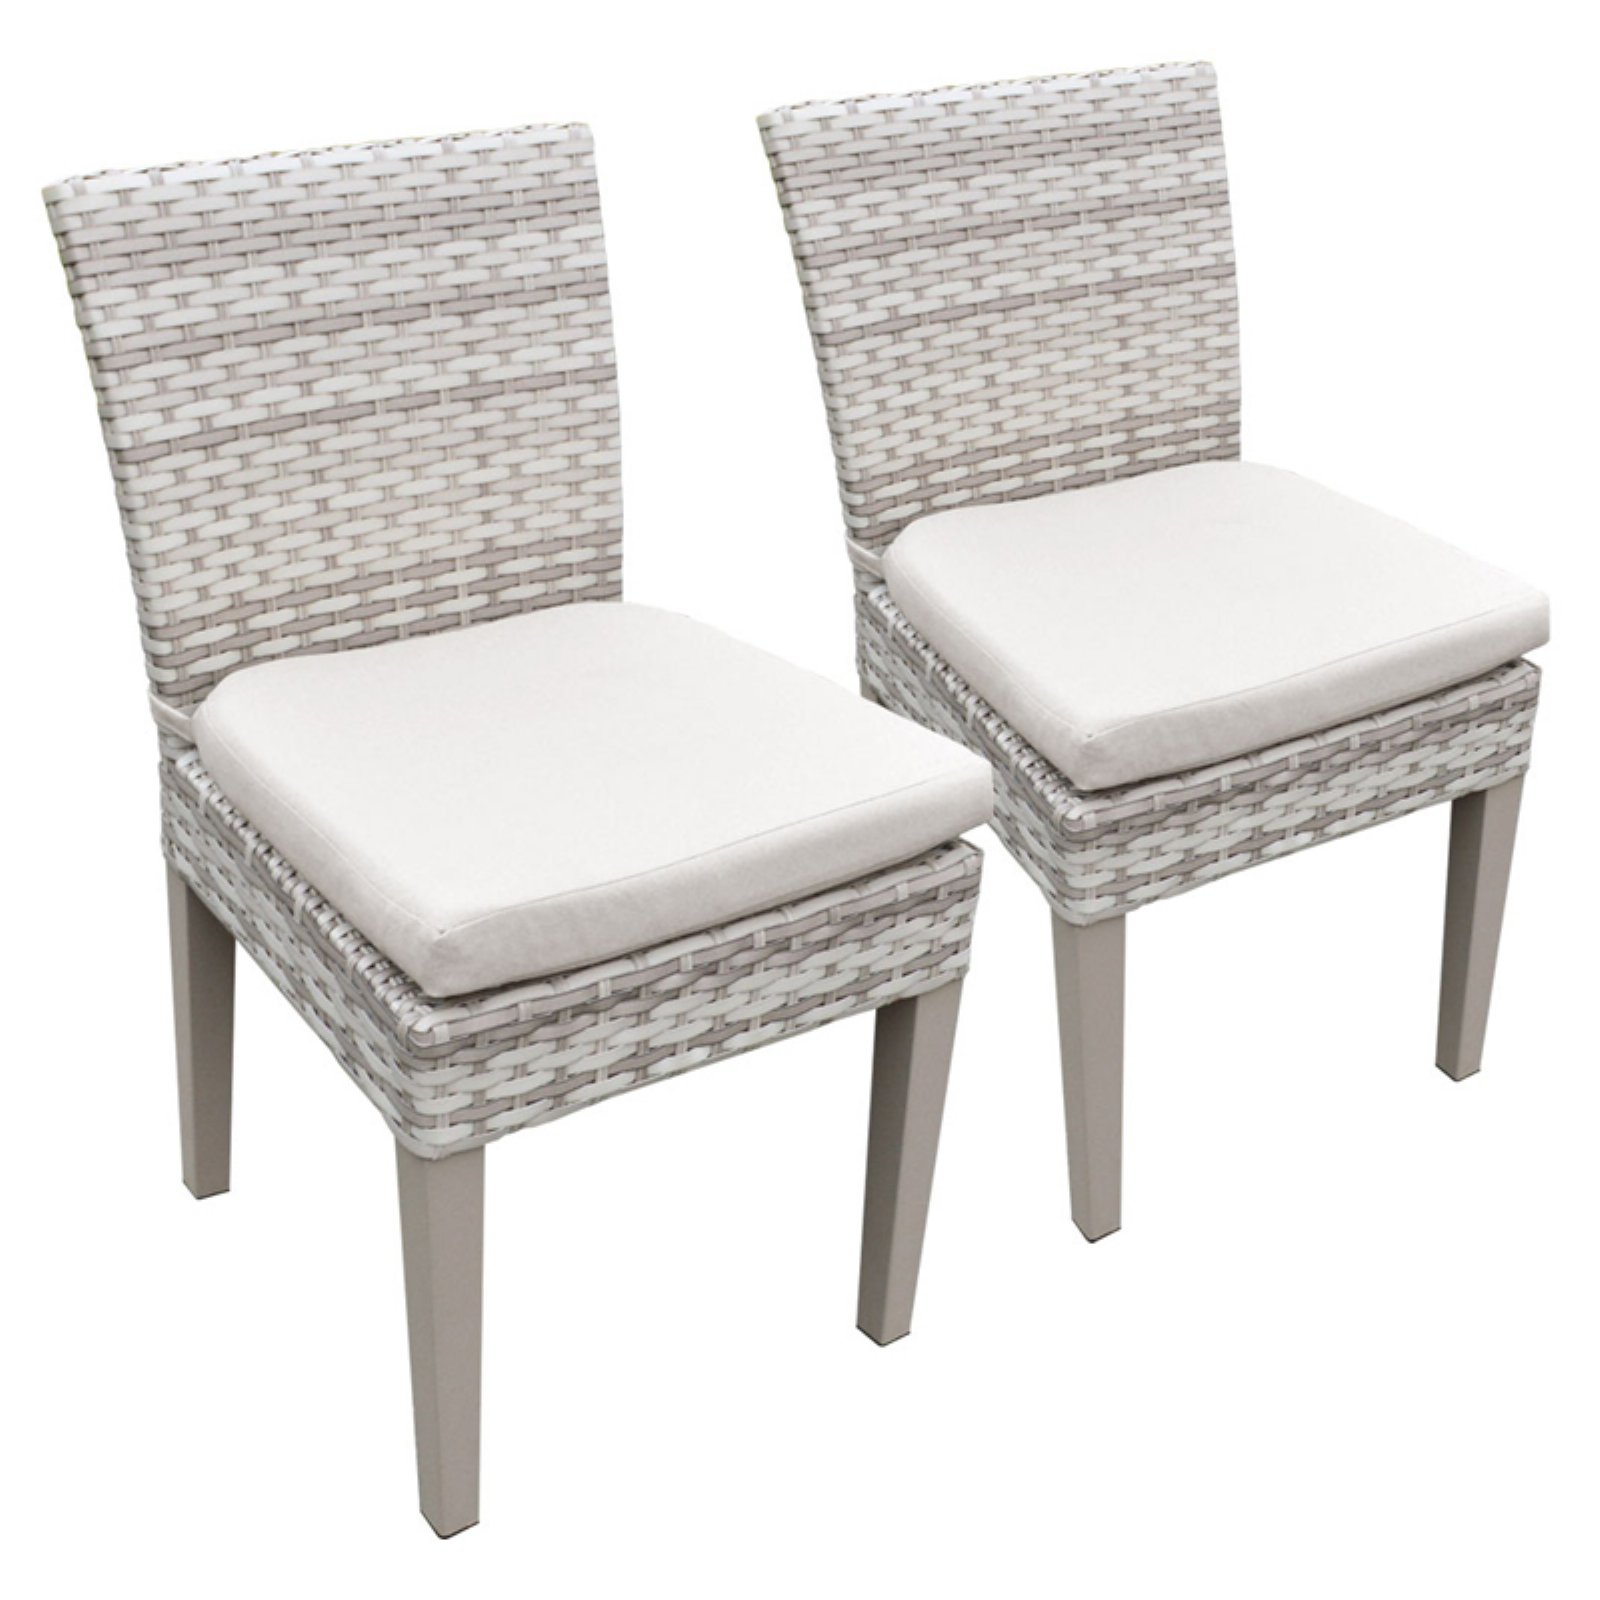 TK Classics Fairmont Armless Outdoor Dining Chairs - image 1 of 2